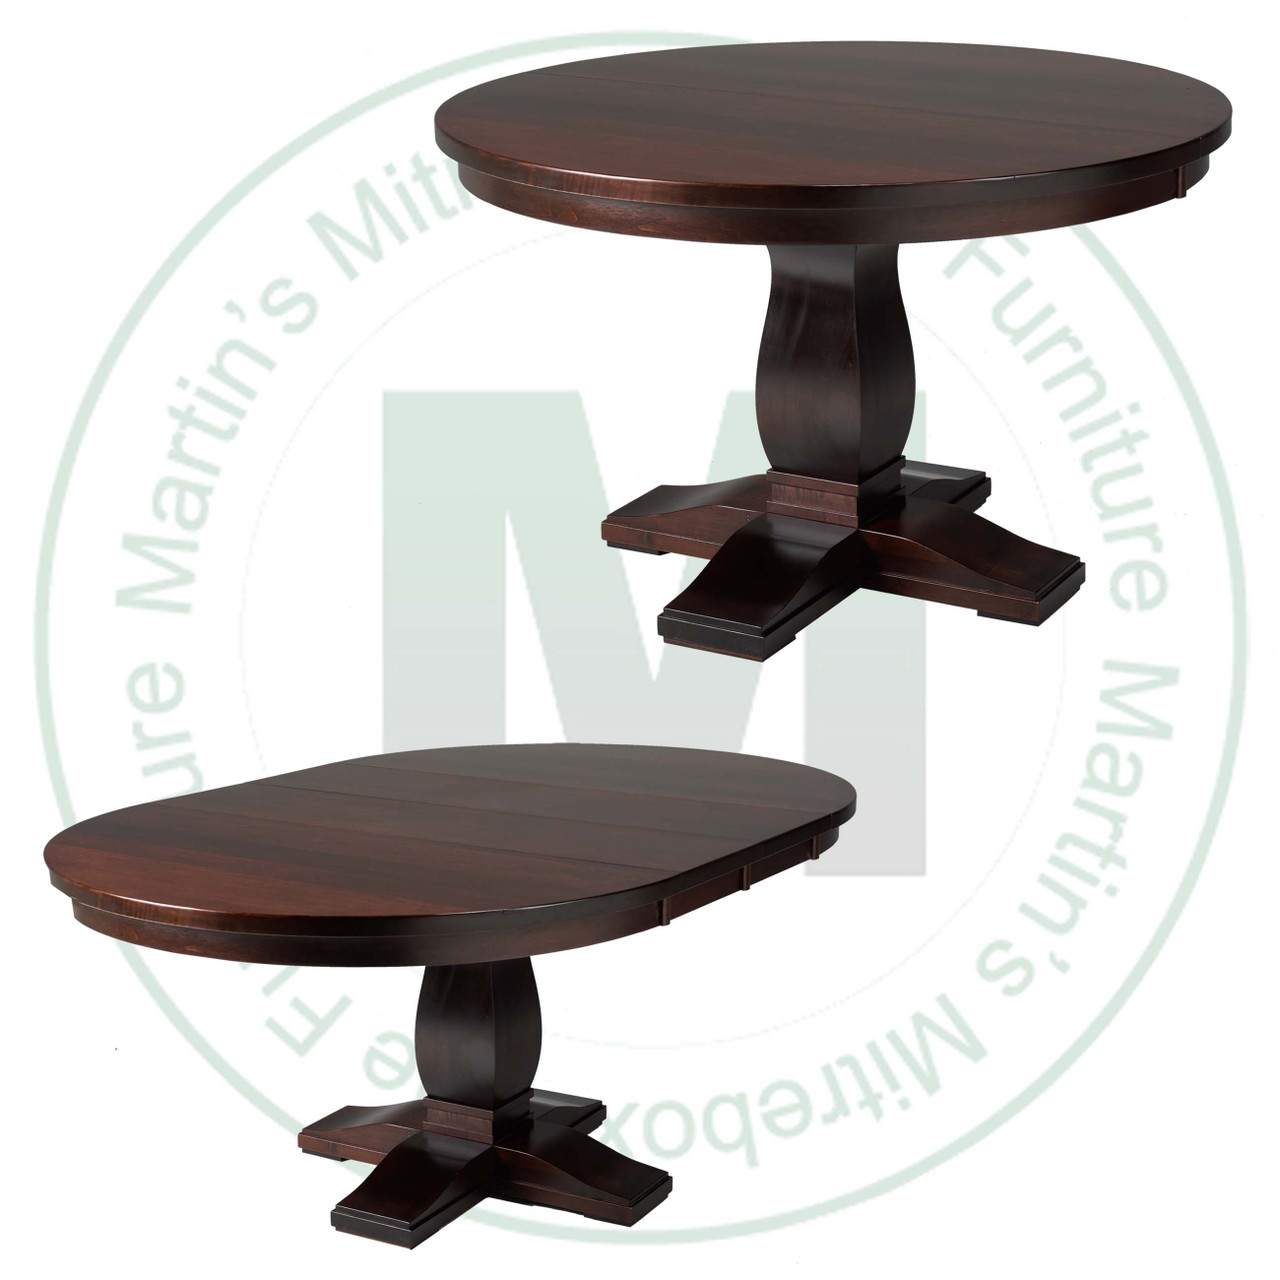 Oak Valencia Single Pedestal Table 42''D x 48''W x 30''H With 2 - 12'' Leaves Table. Table Has 1'' Thick Top.